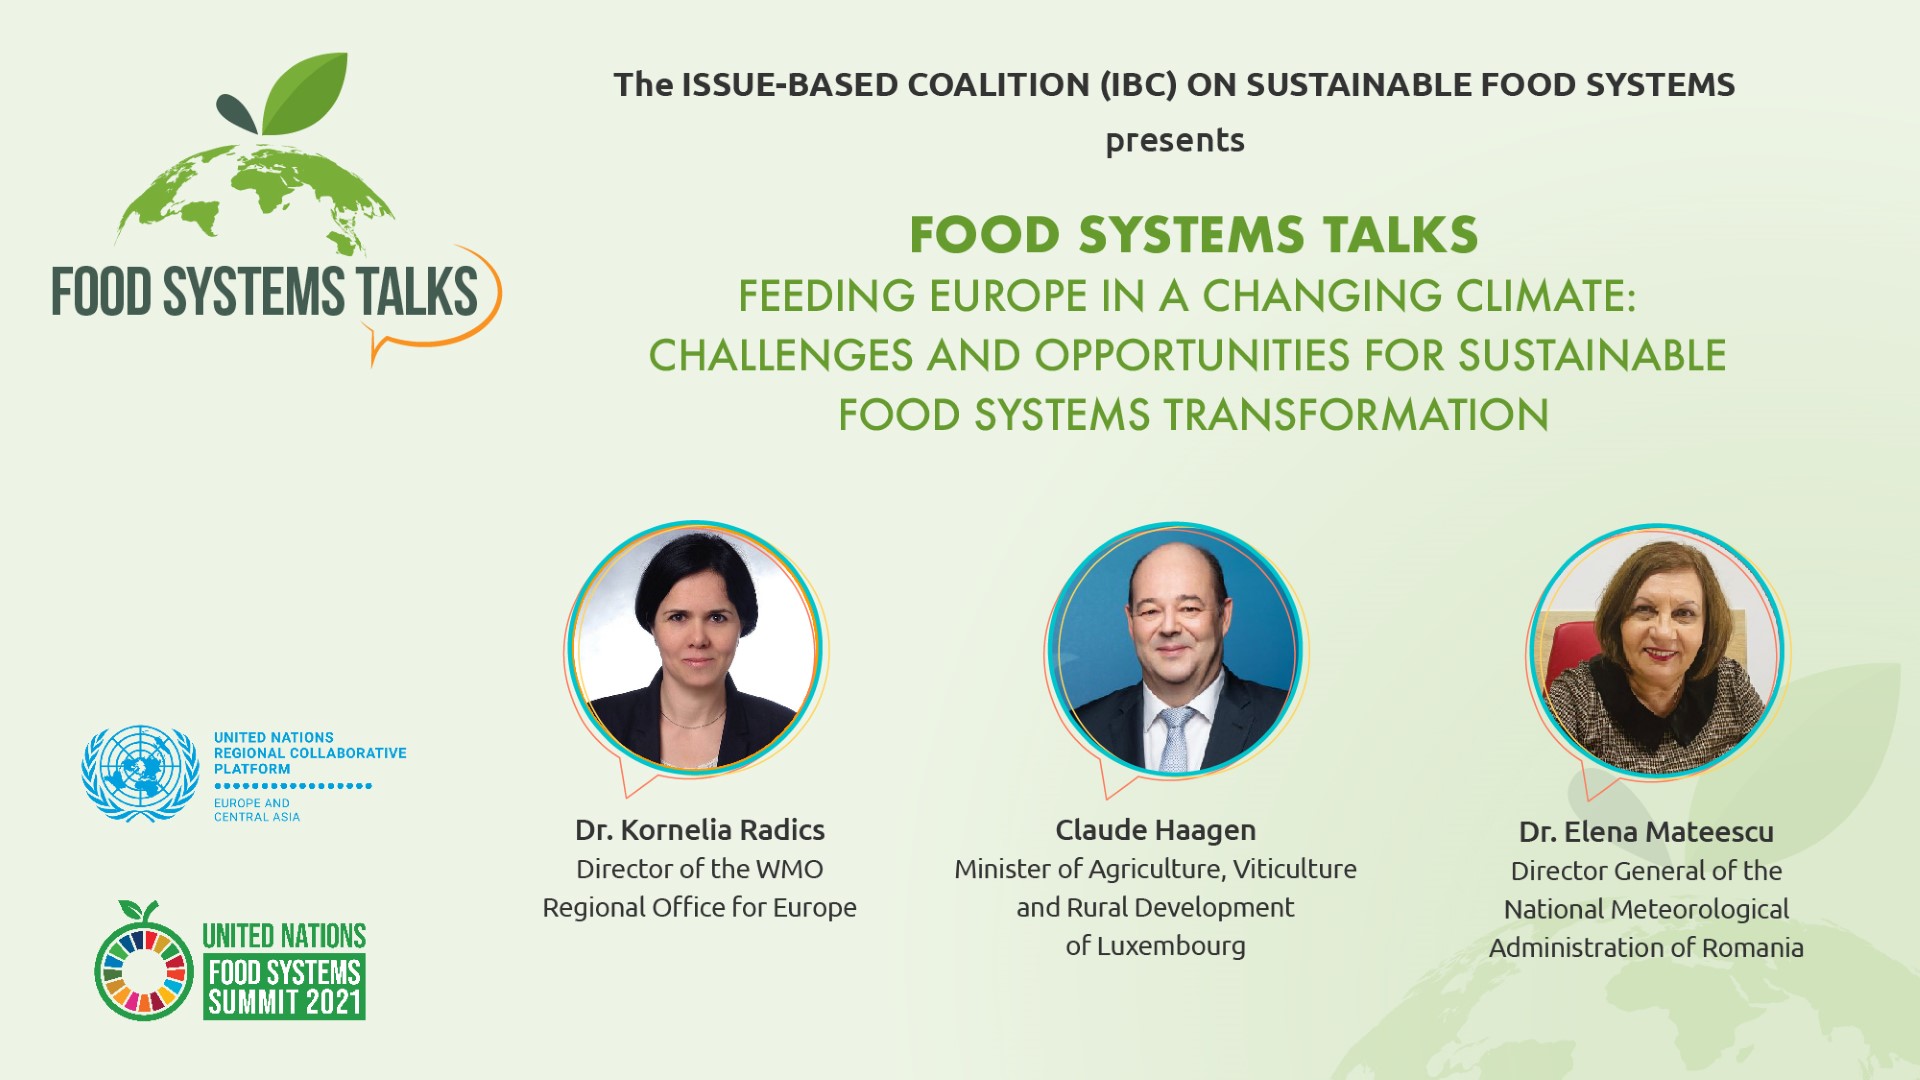 5th Food Systems Talk by the IBC-SFS